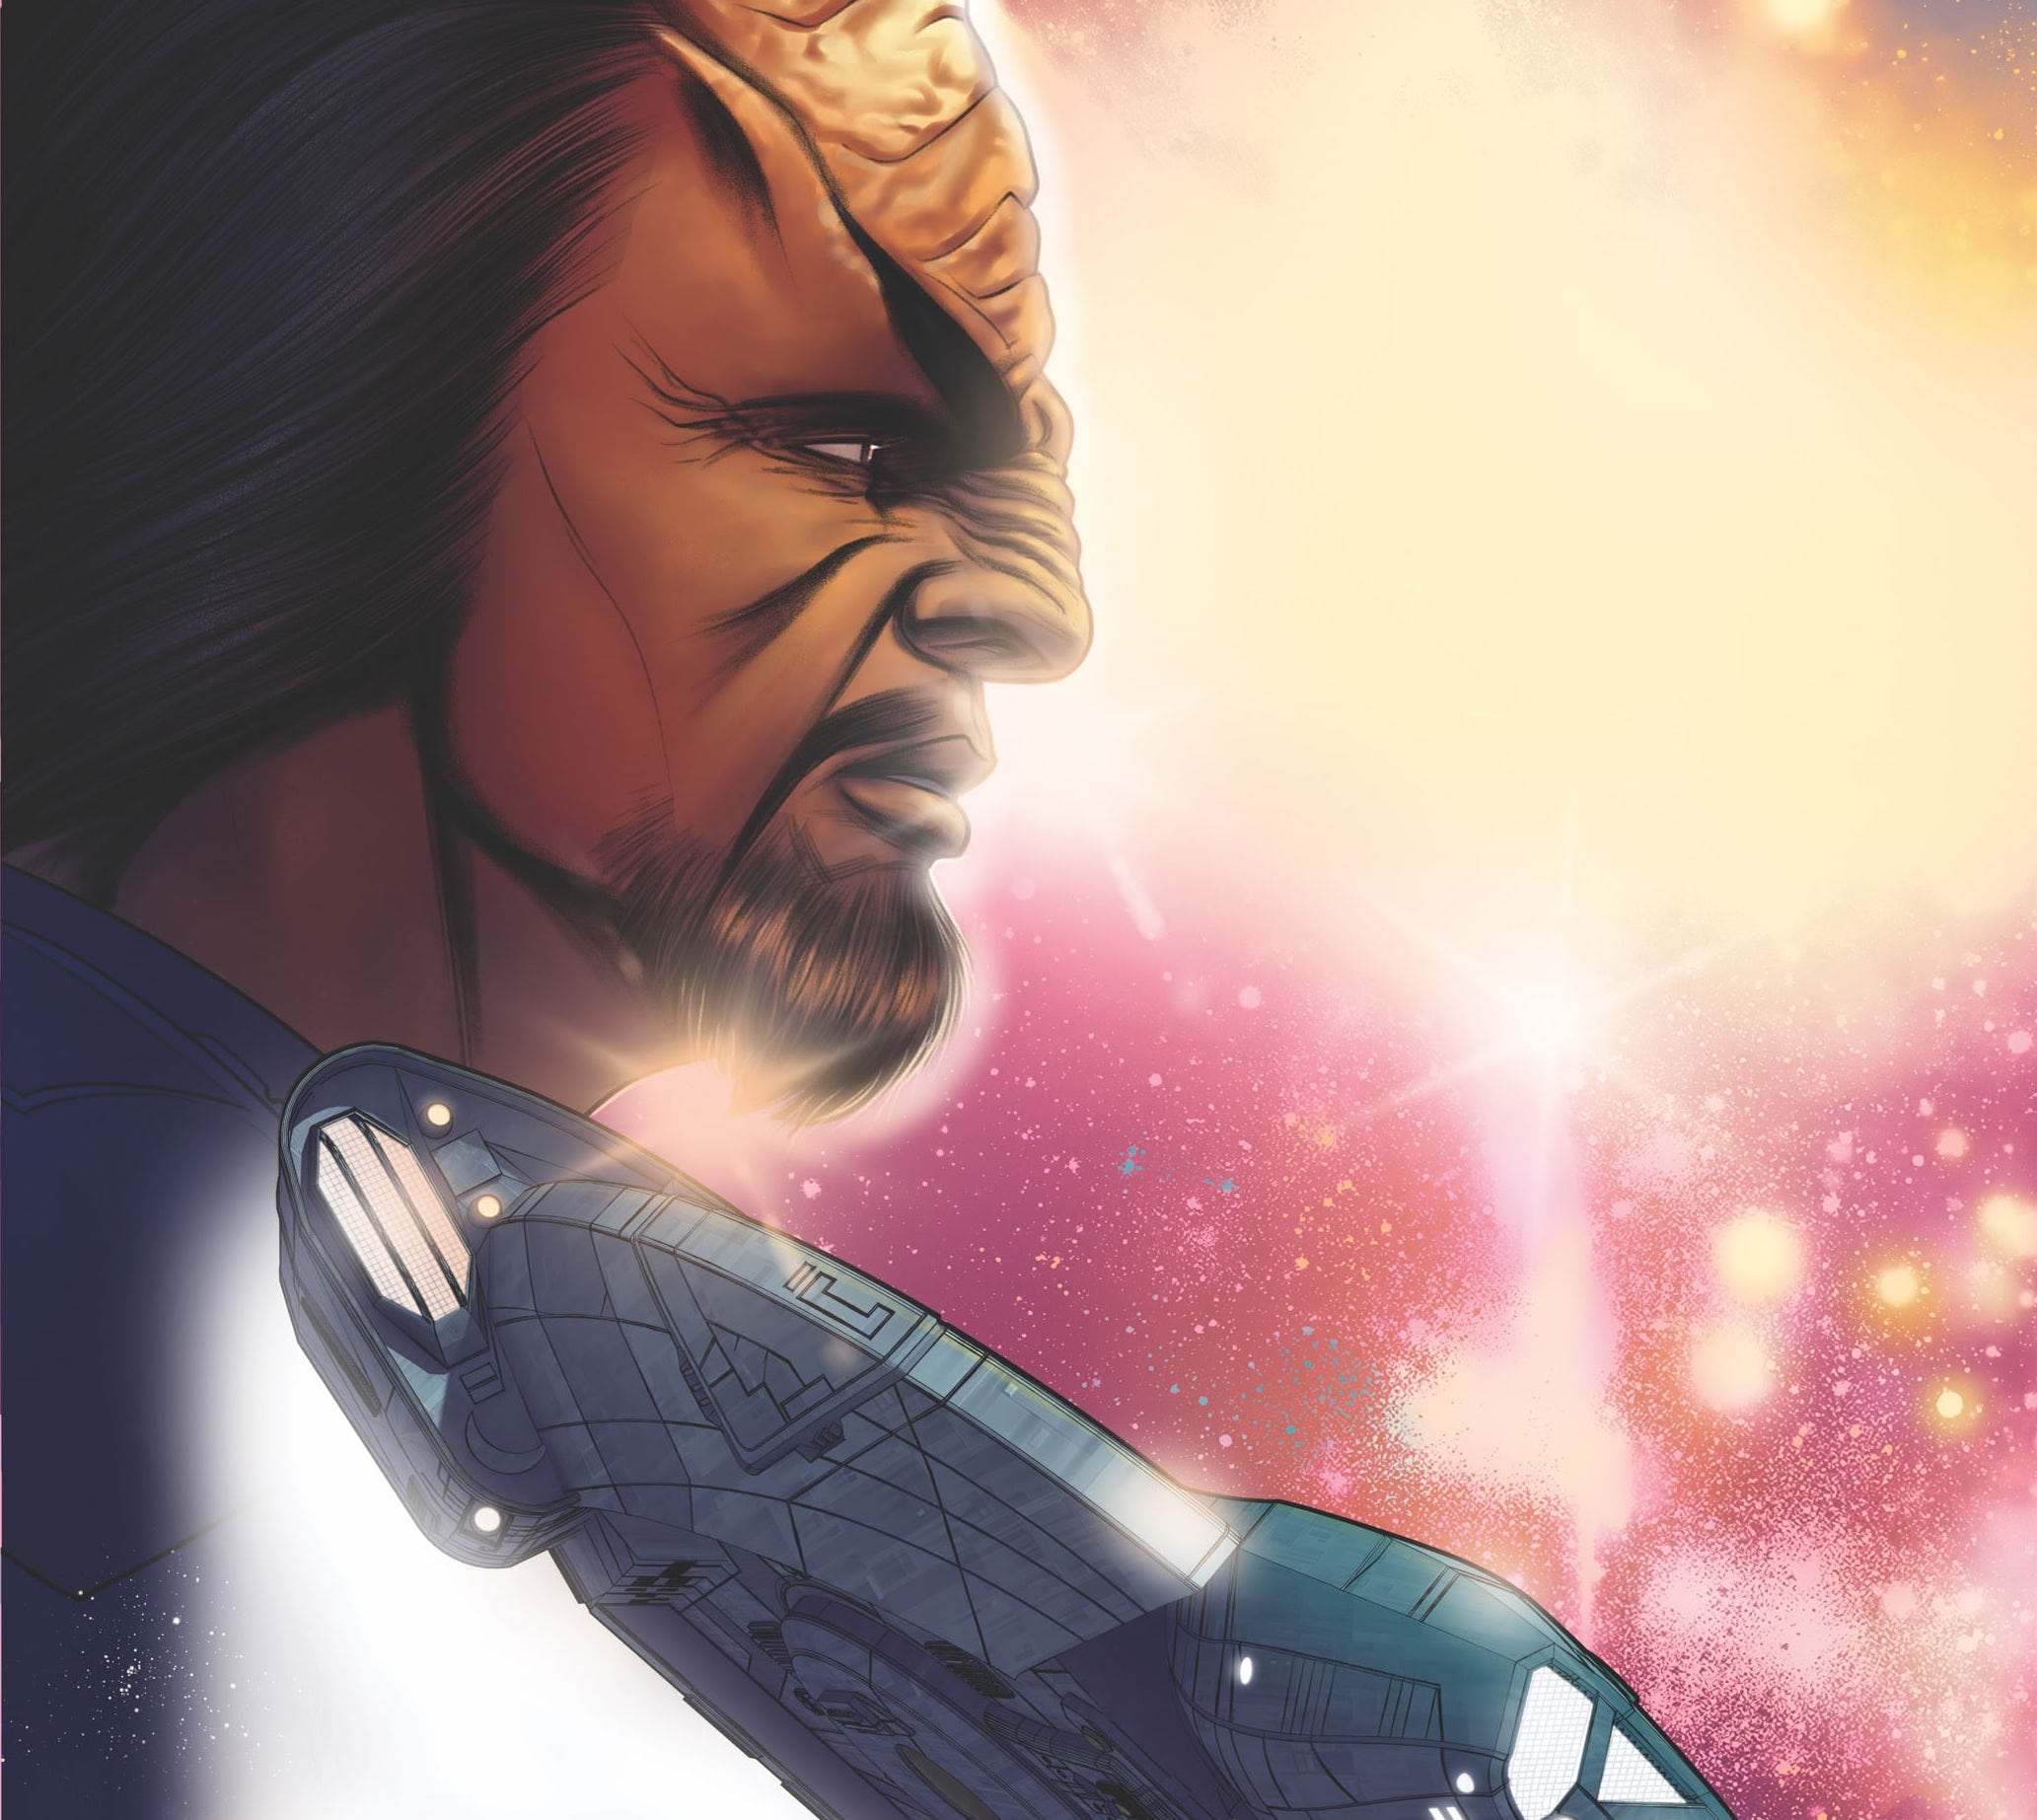 IDW launching first-ever Star Trek comics crossover event 'Day of Blood'